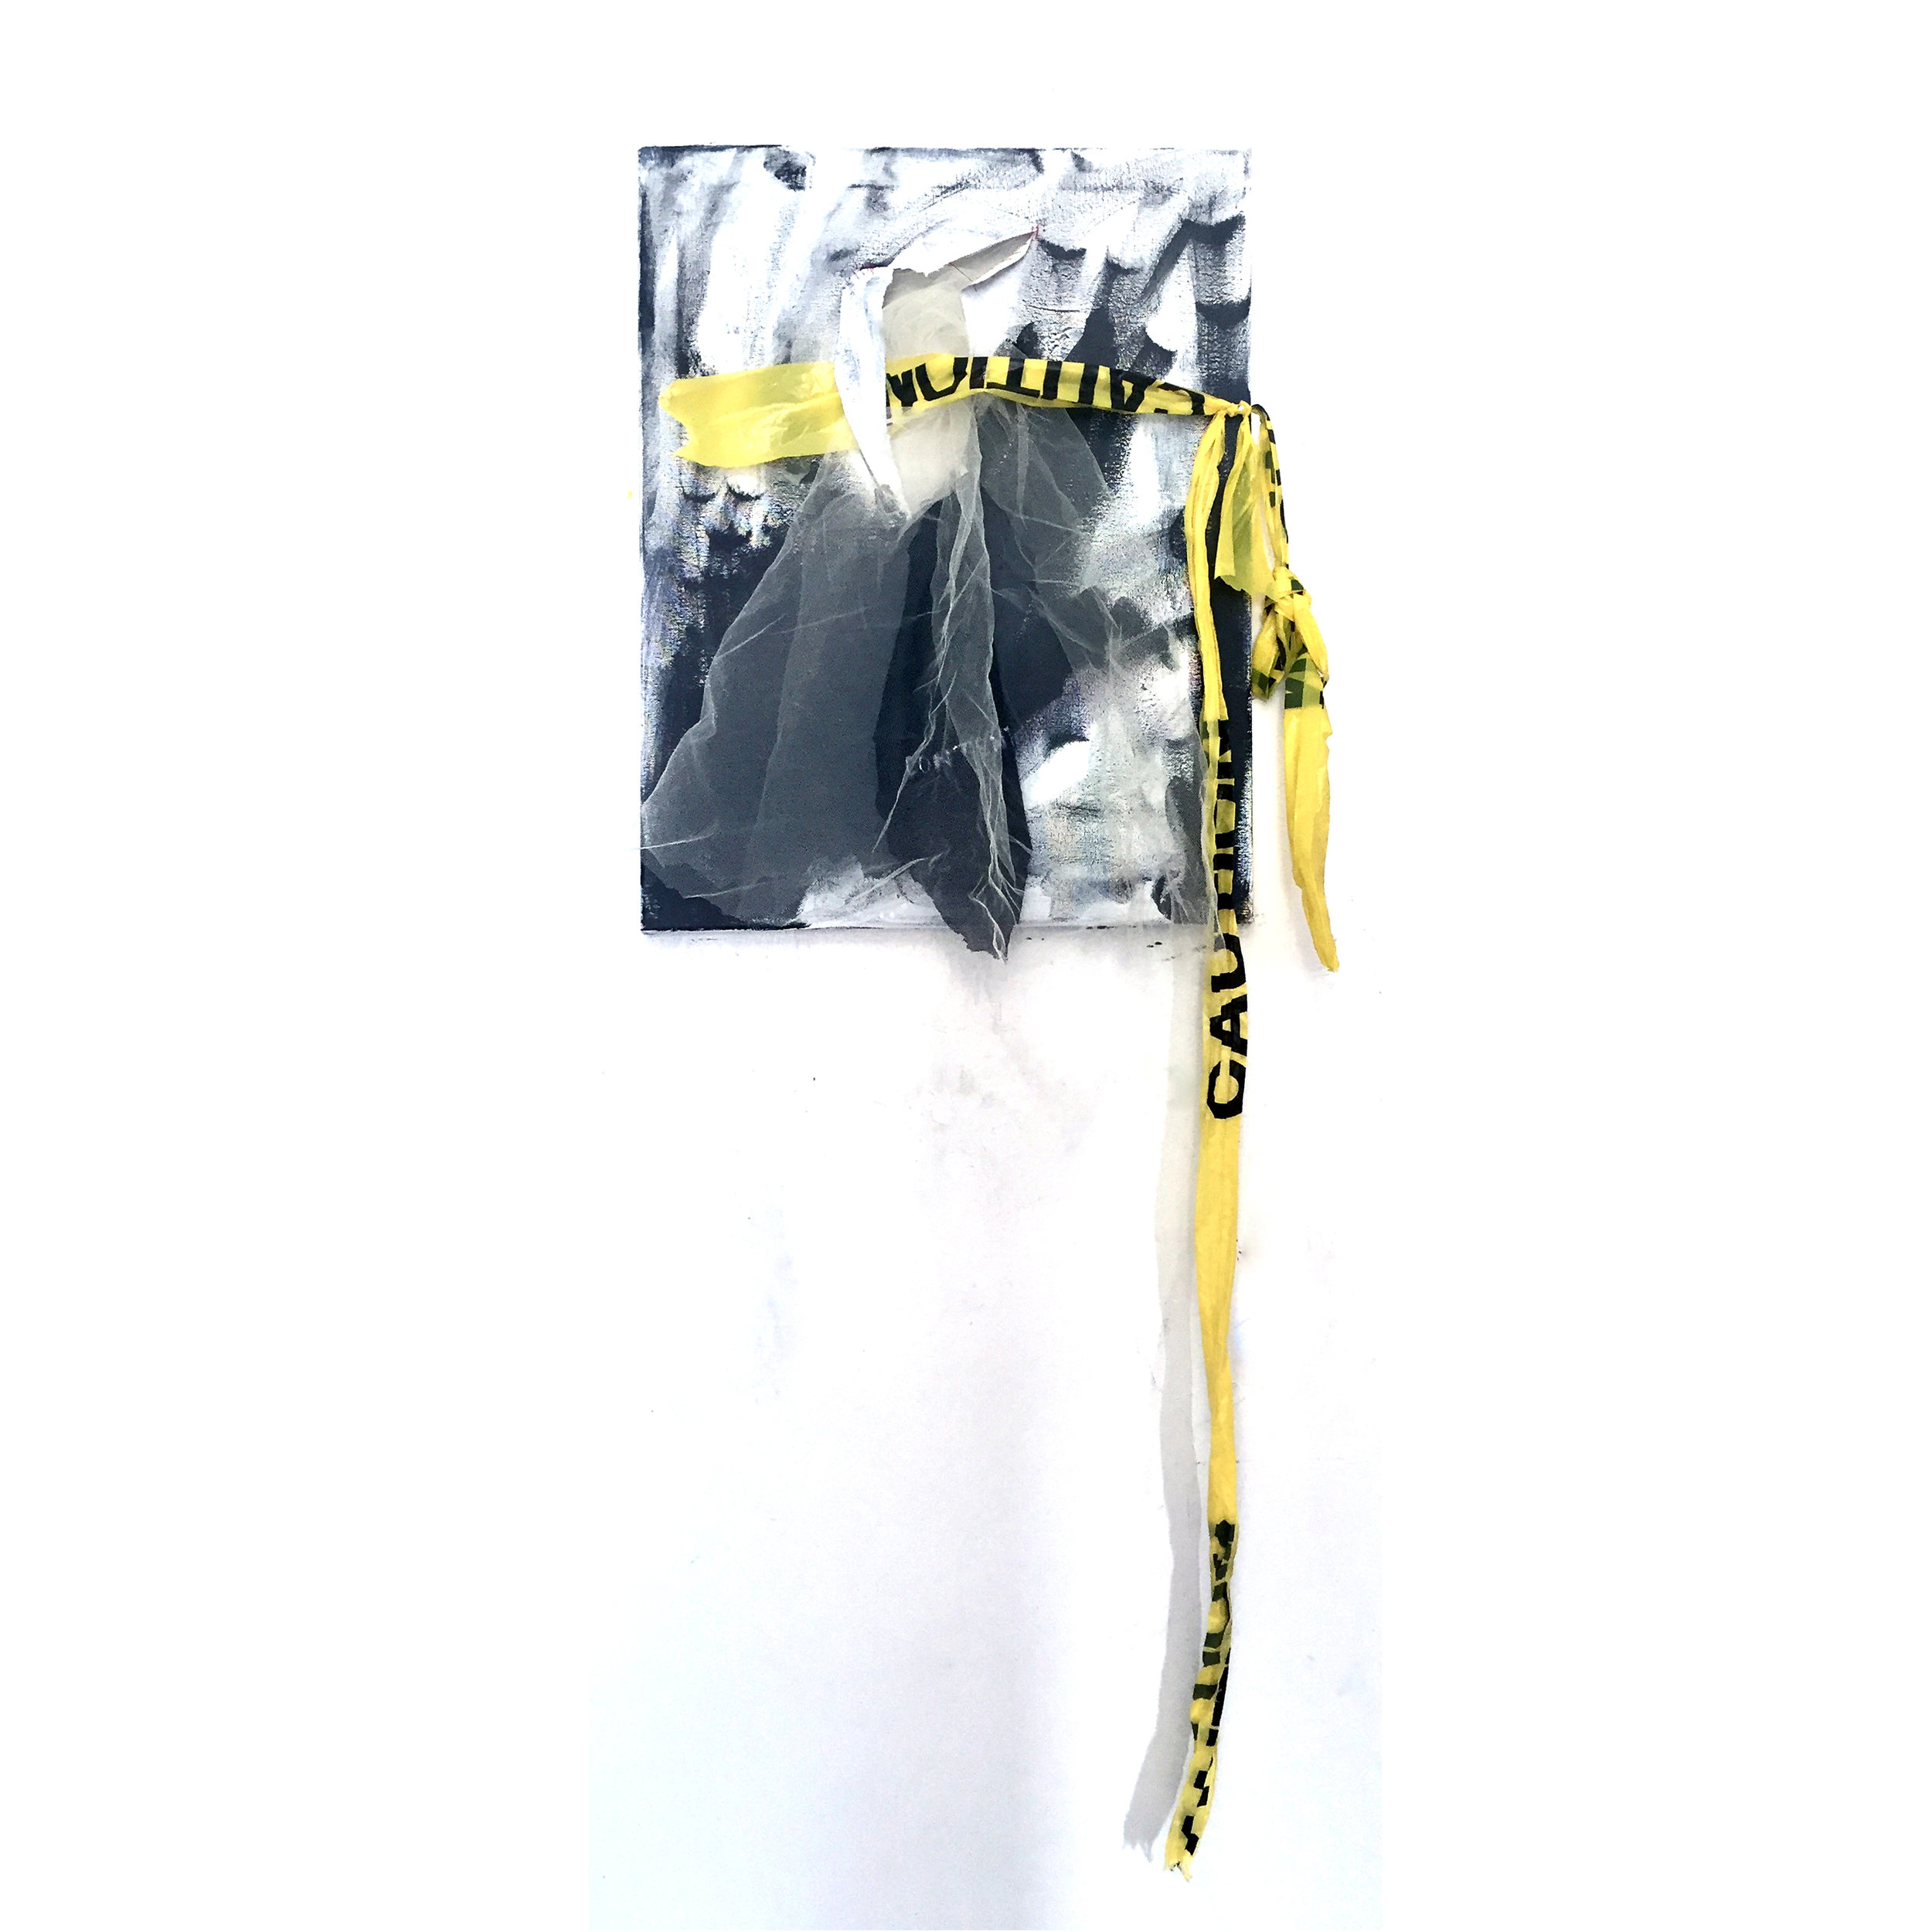 CAUTION (CONTENT), 2018, acrylic, fabric, caution tape and thread on canvas, 42" x 19" x 5"